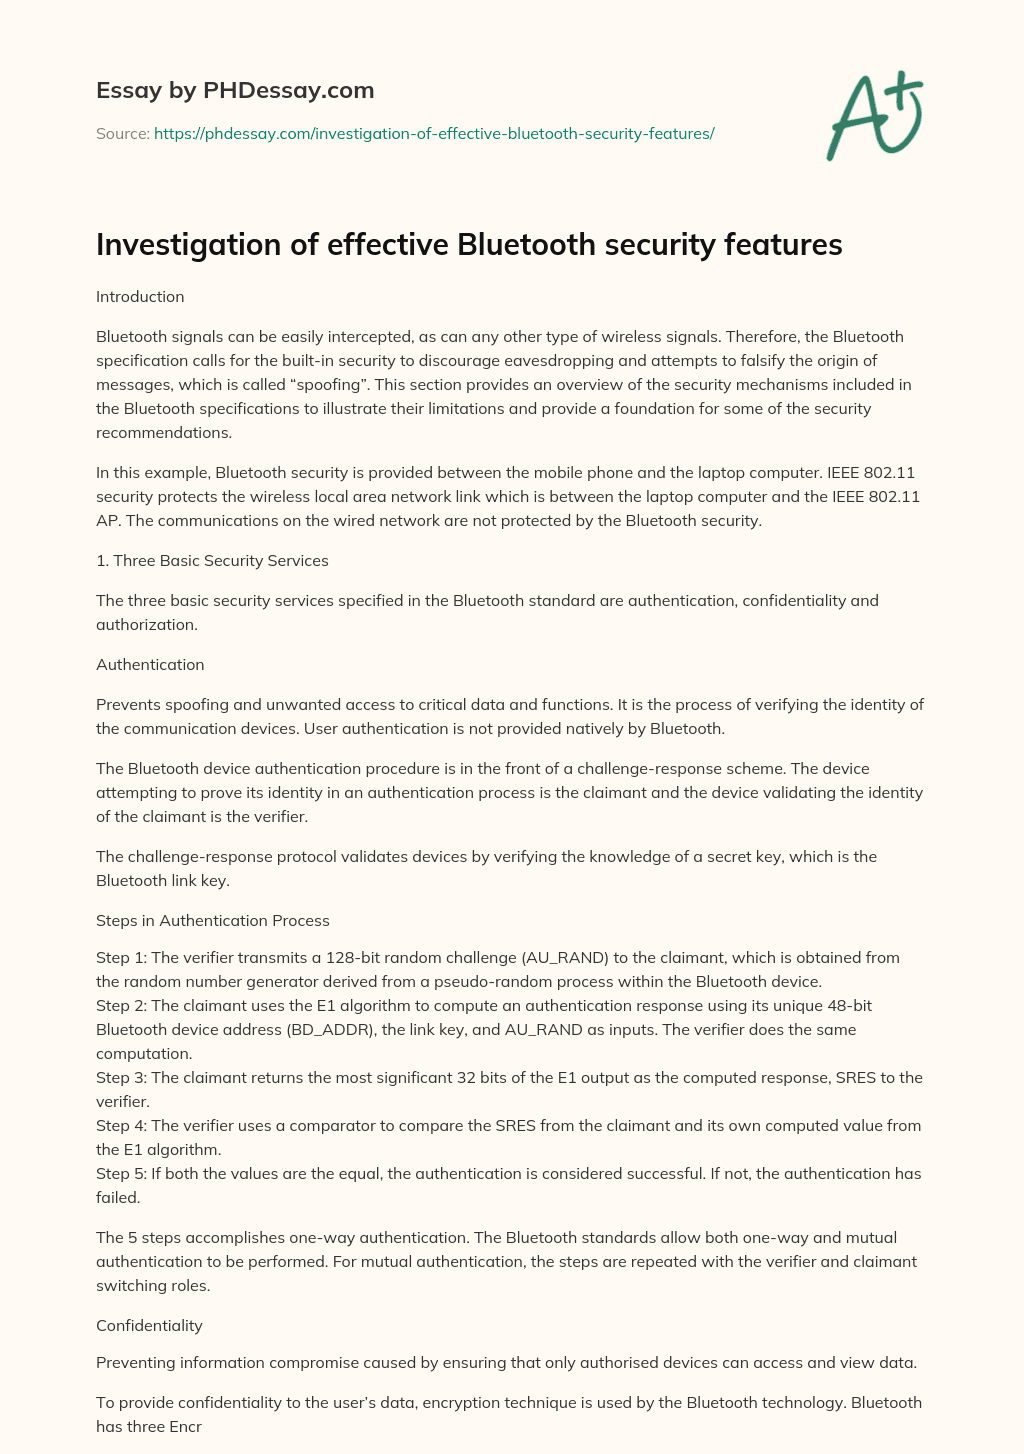 Investigation of effective Bluetooth security features essay